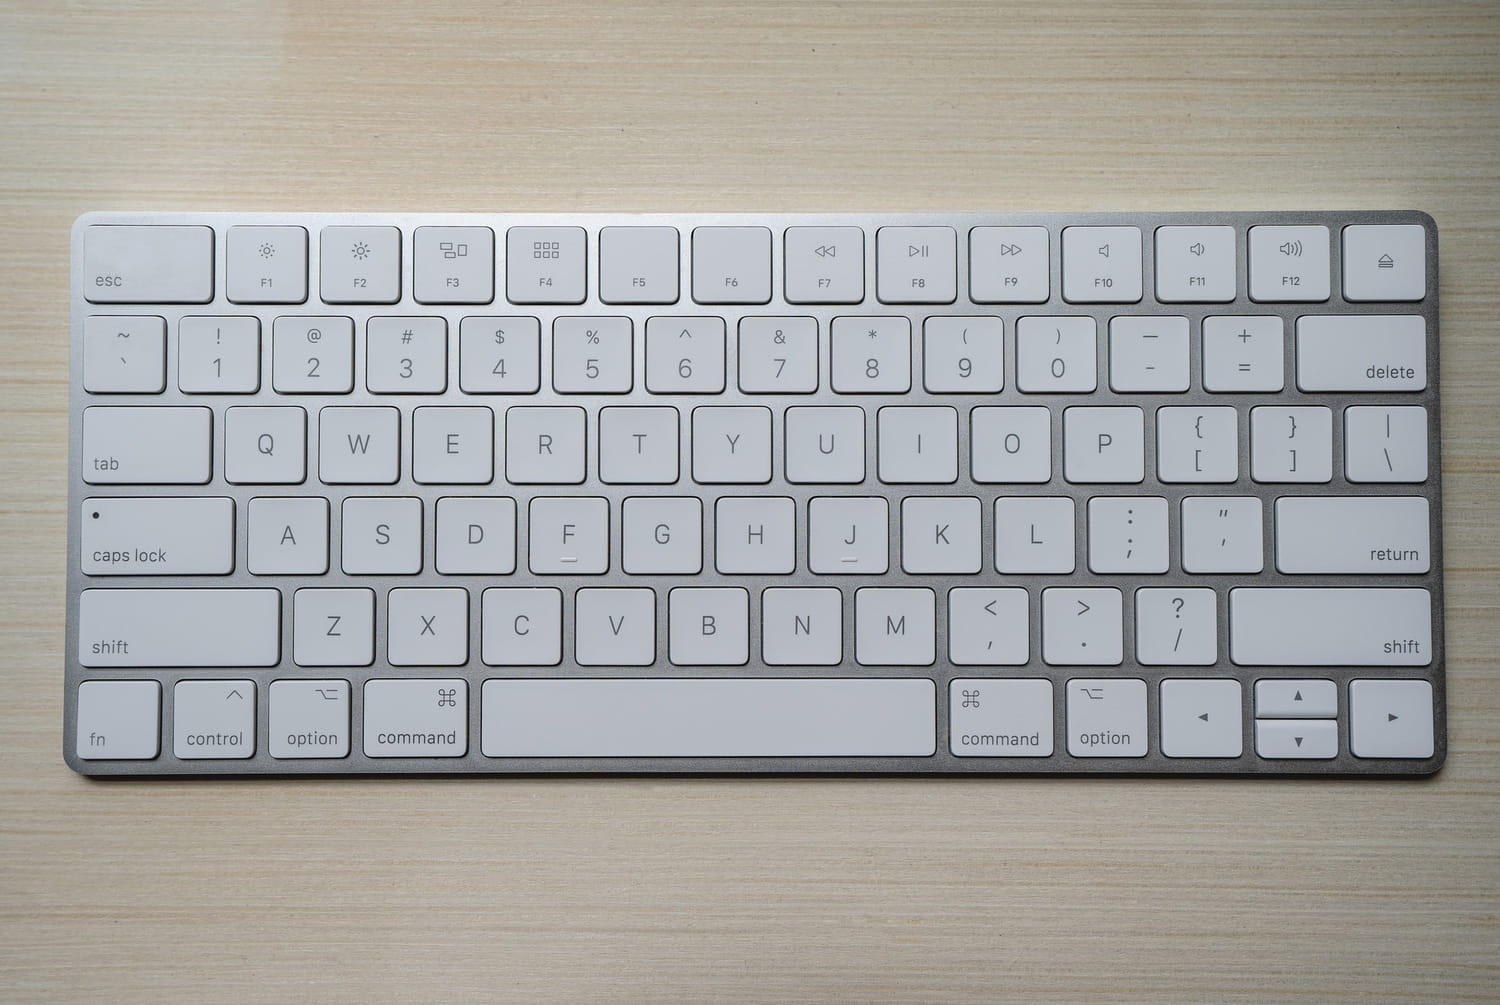 using control button instead of command button for microsoft keyboard with mac os